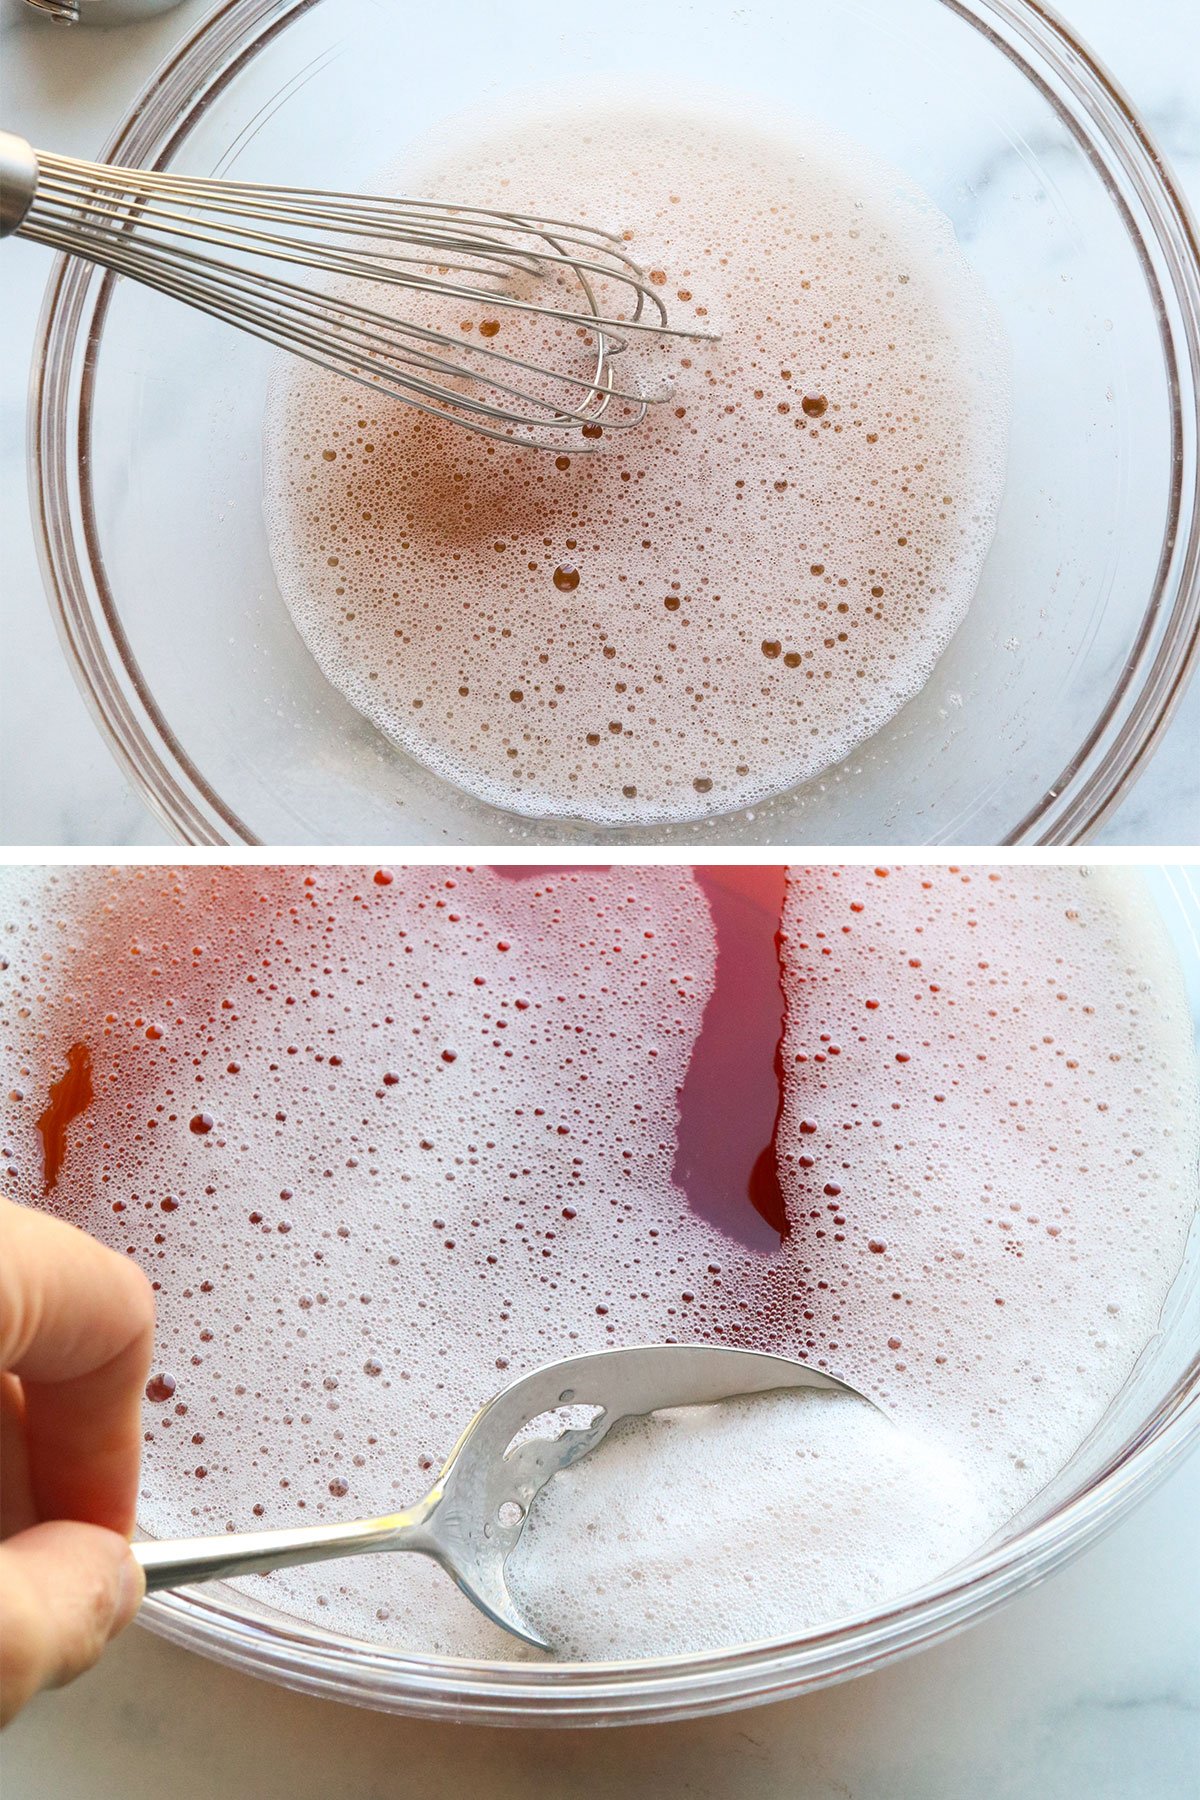 hot water whisked into gelatin and fruit juice with foam removed with spoon.